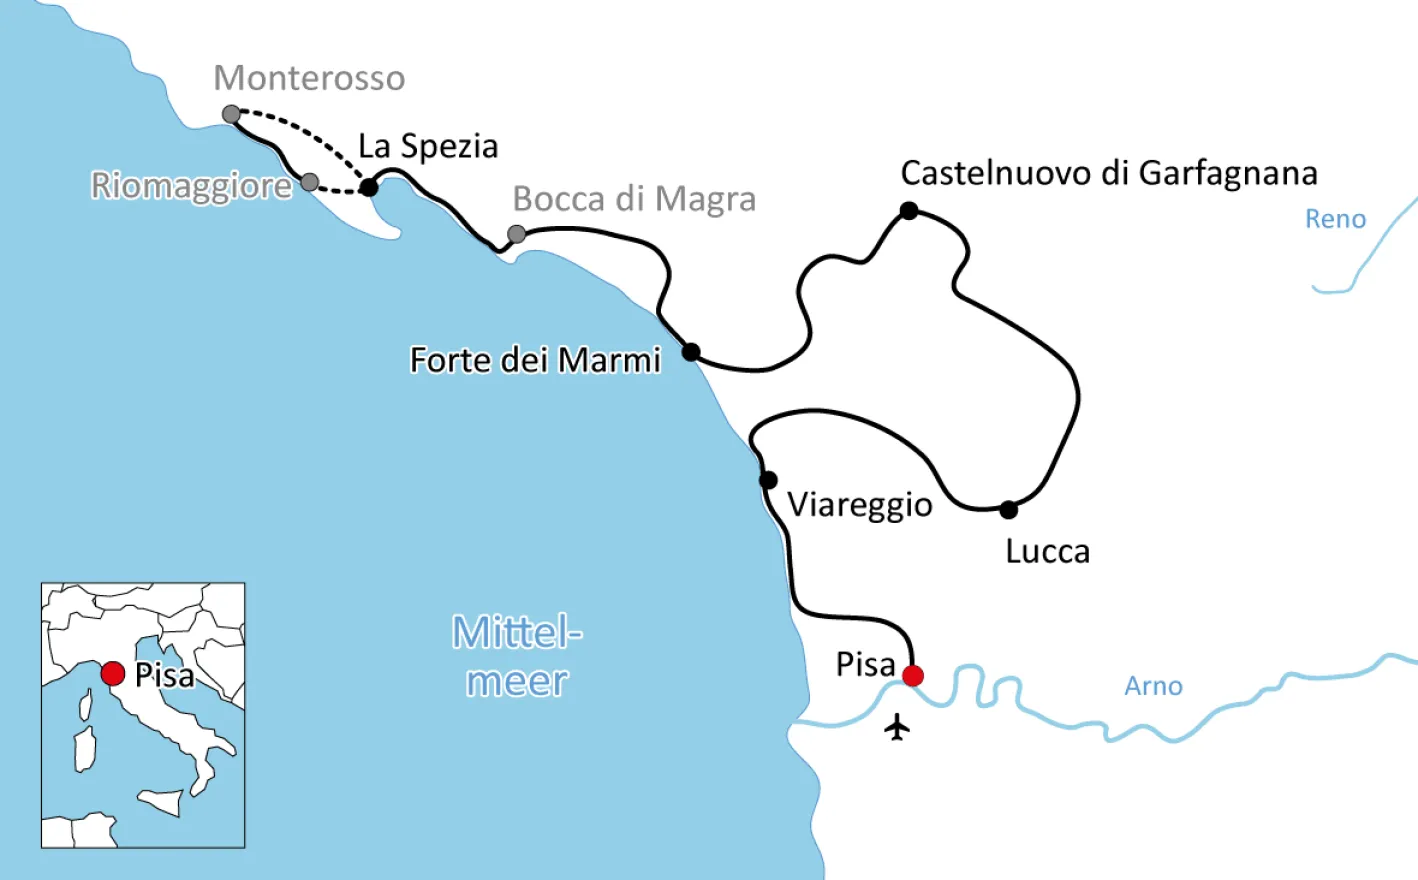 Map for the Bike Tour from Pisa to Cinque Terre